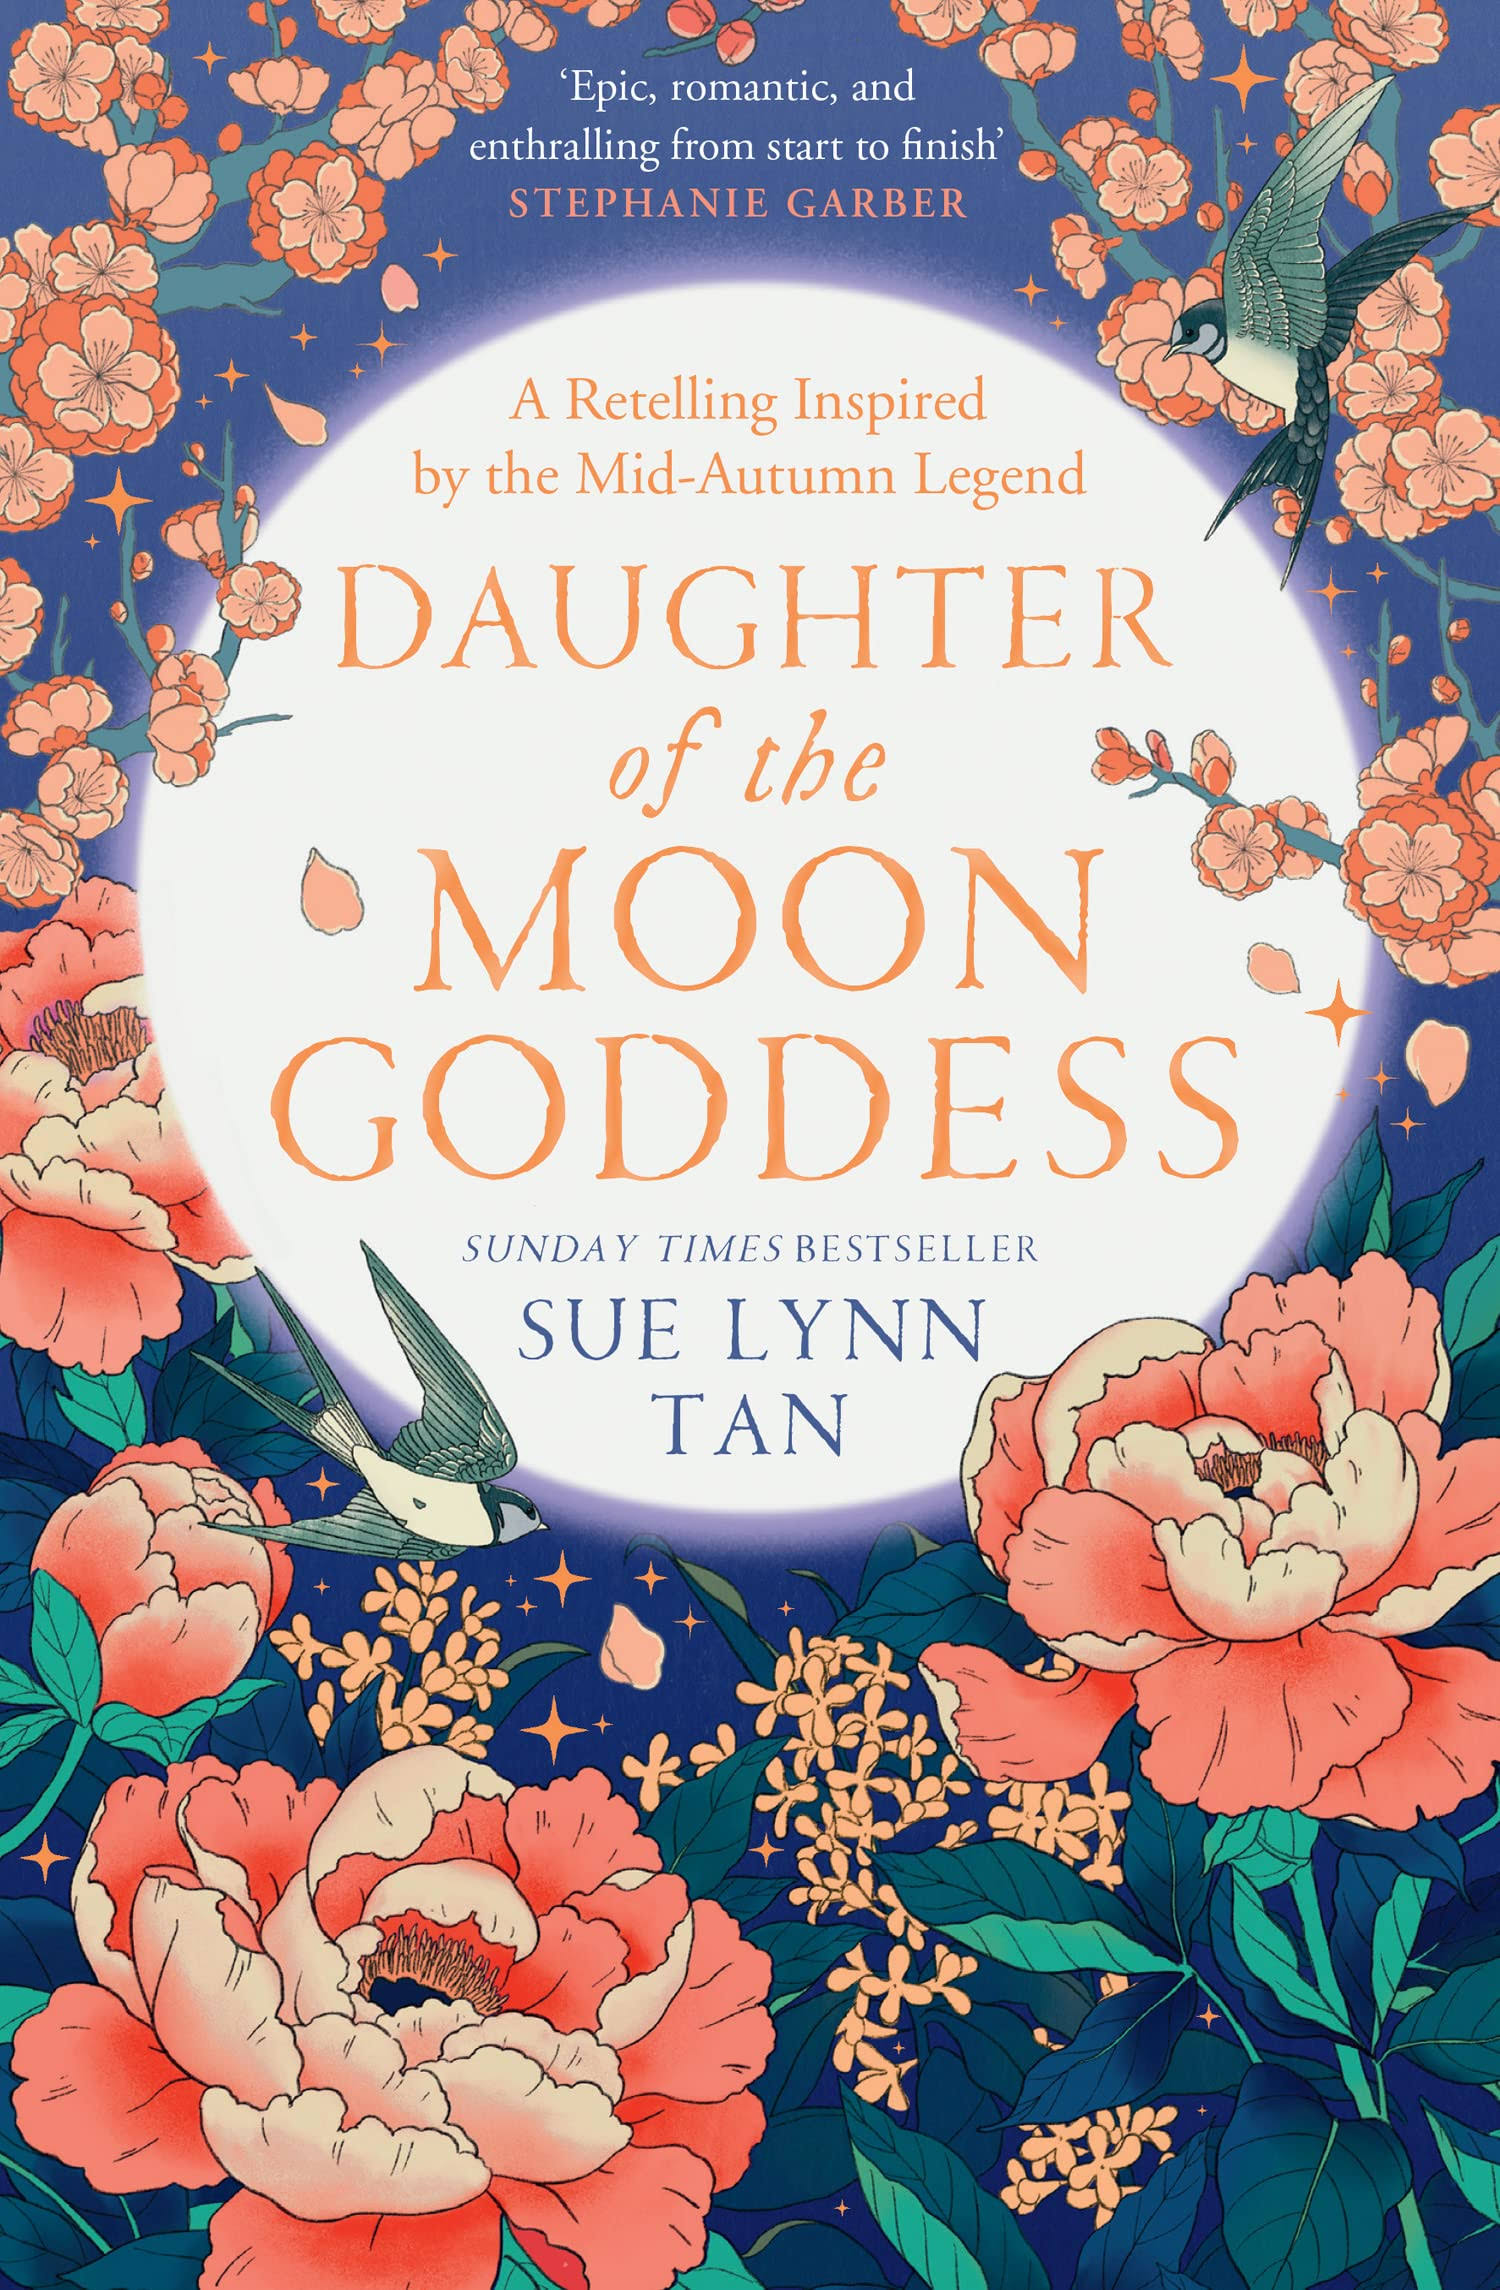 Daughter of the Moon Goddess [Book]